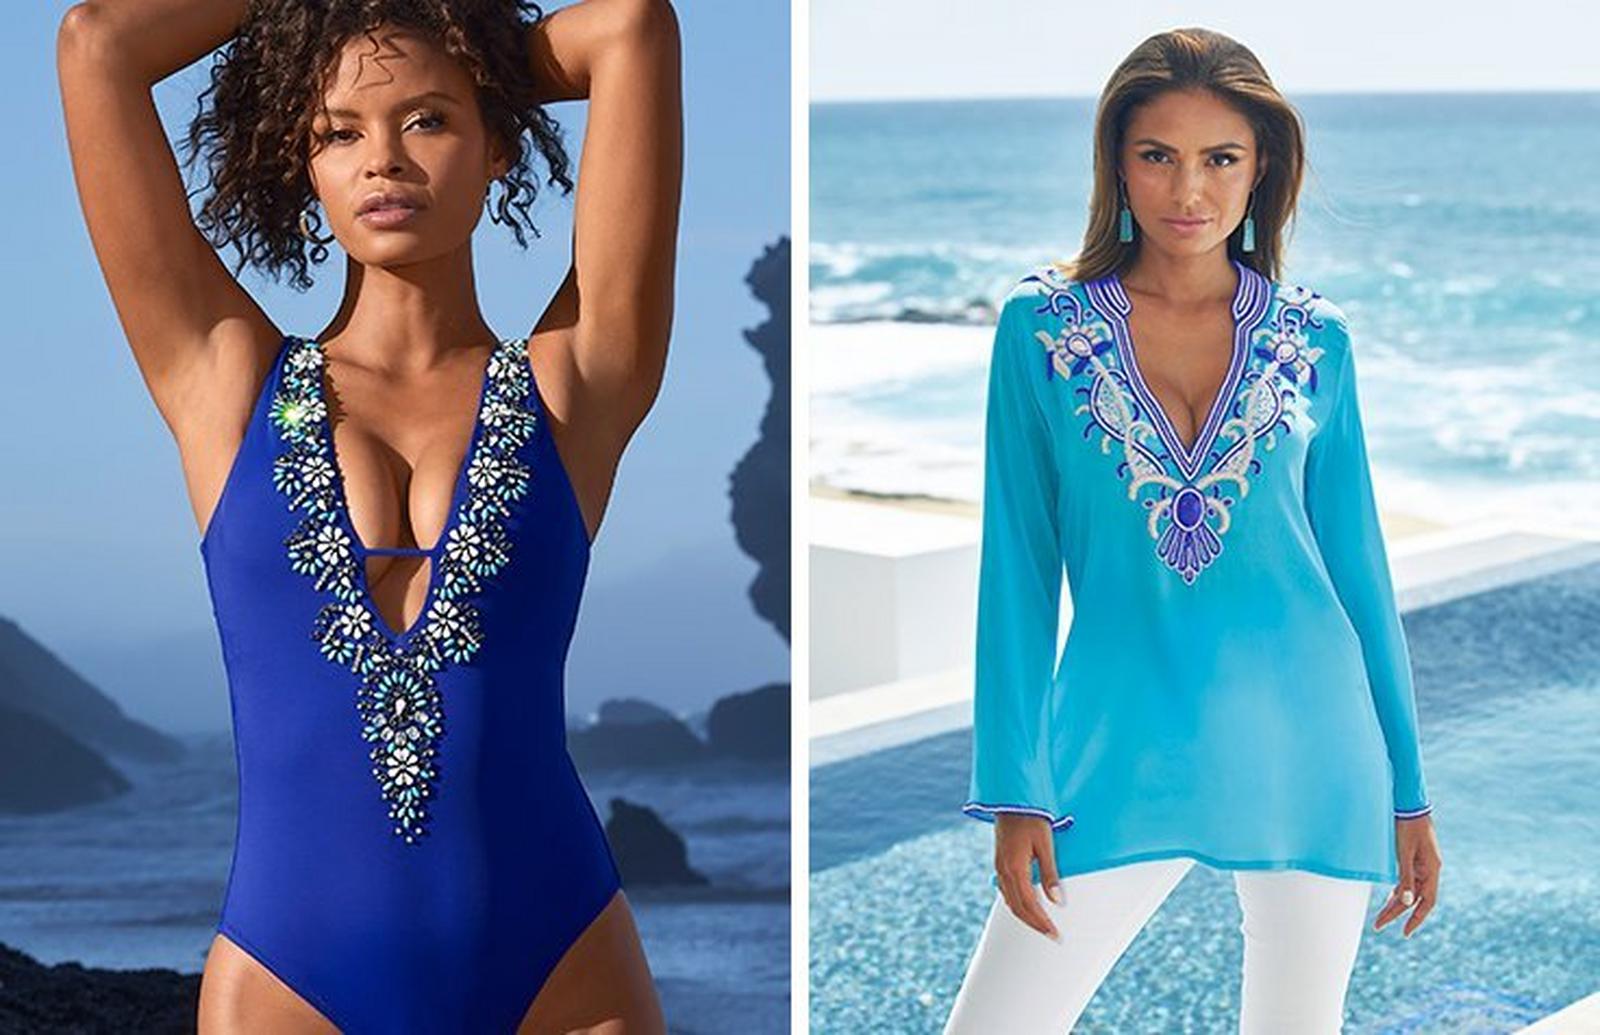 left model wearing a blue plunge embellished one-piece swimsuit. right model wearing a light blue embellished and embroidered tunic top and white jeans.